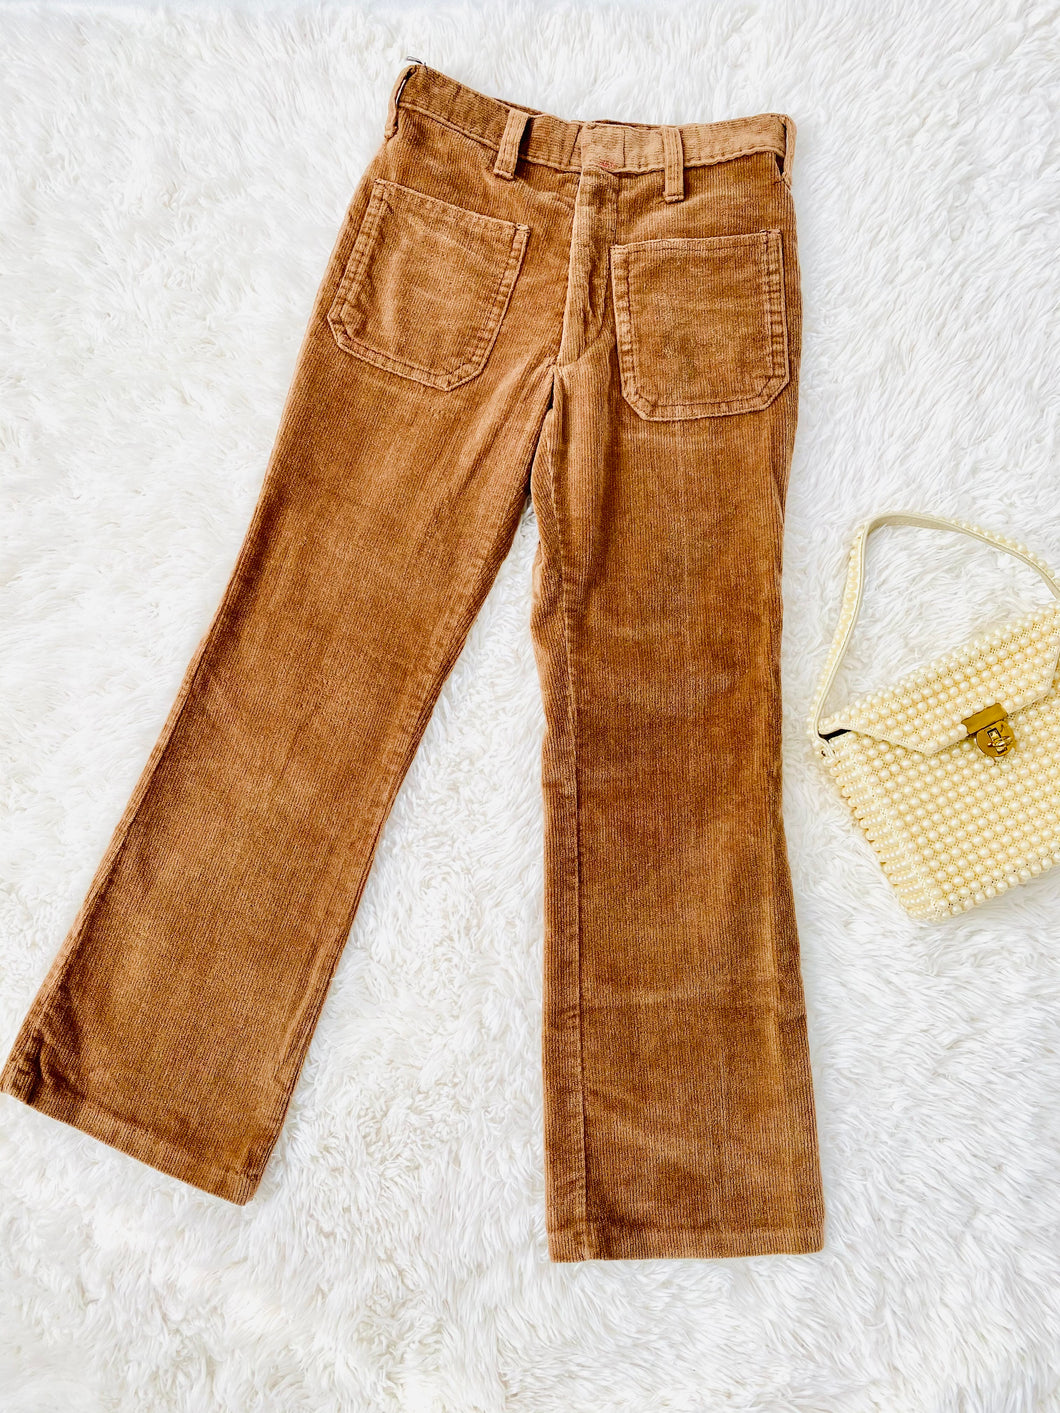 Vintage 1970s brown straight leg corduroy pants with front pockets